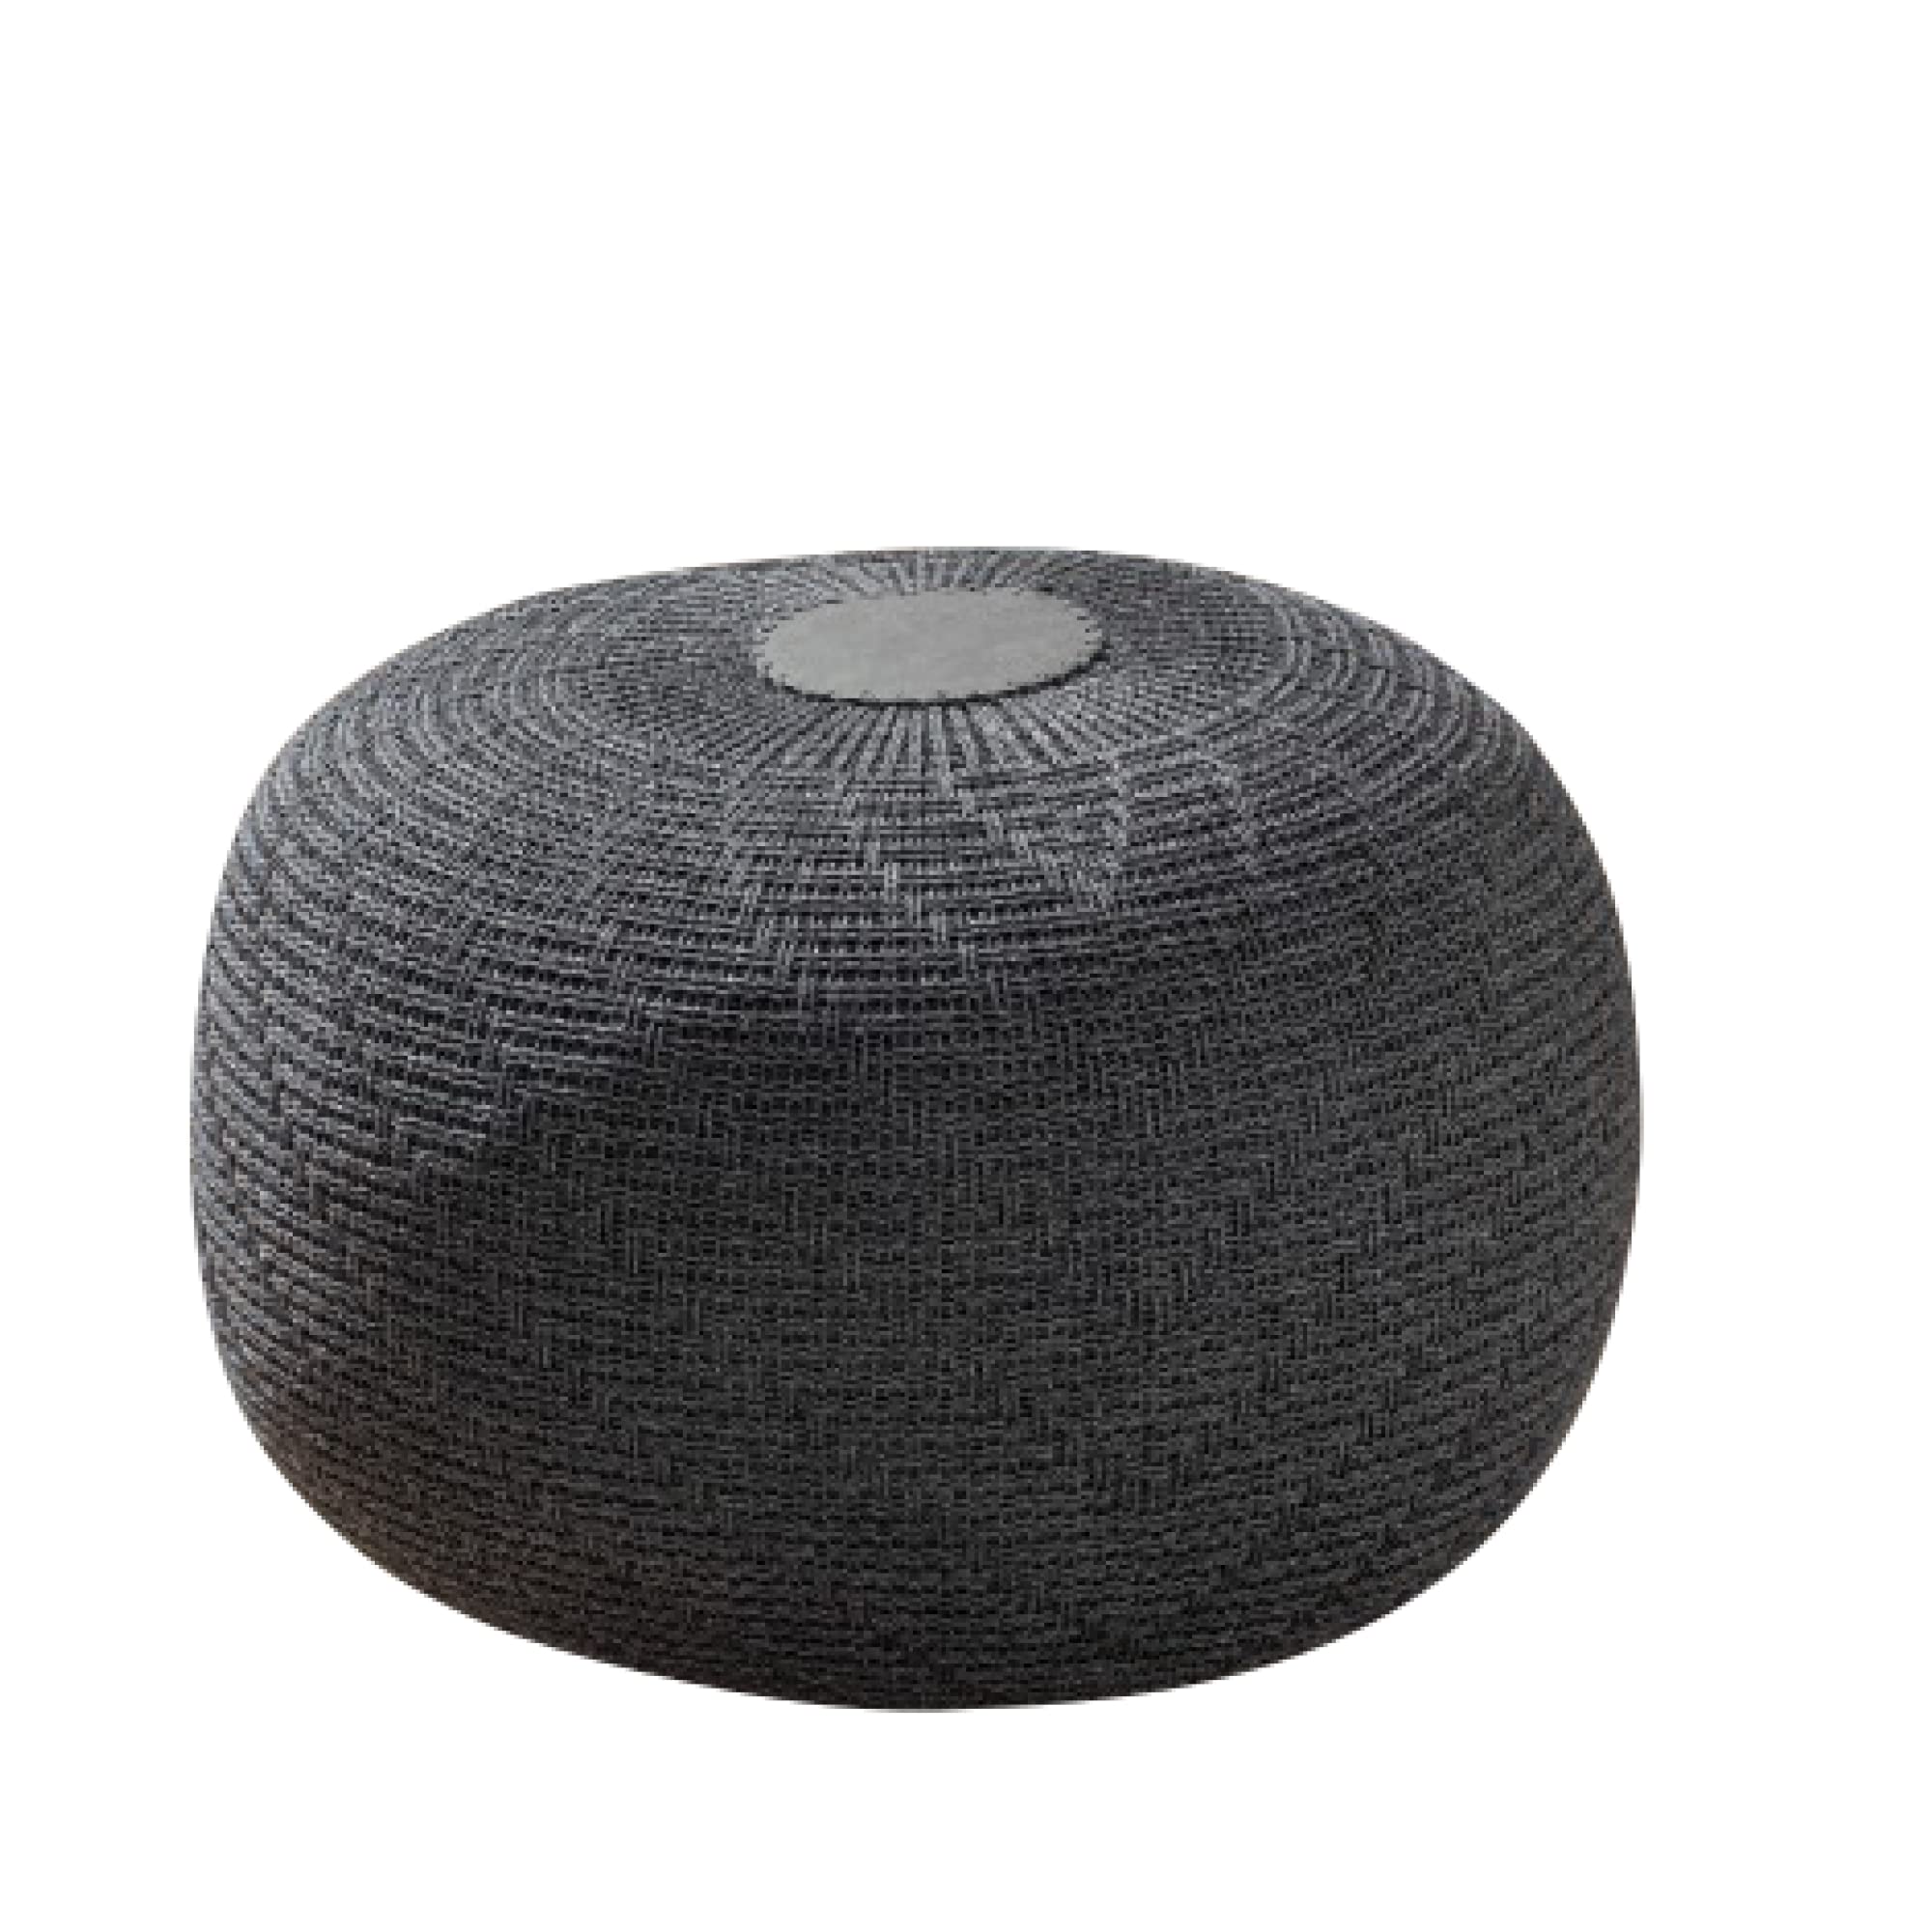 English Home Round Ottoman Pouf Footstool Knitted Pouffe Stool Seat Cushion Boho Home Decor Extra Seating Floor Cushion for Living Room, Bedroom, Indoor, Outdoor 37 x 50 cm Anthracite - image 5 of 6